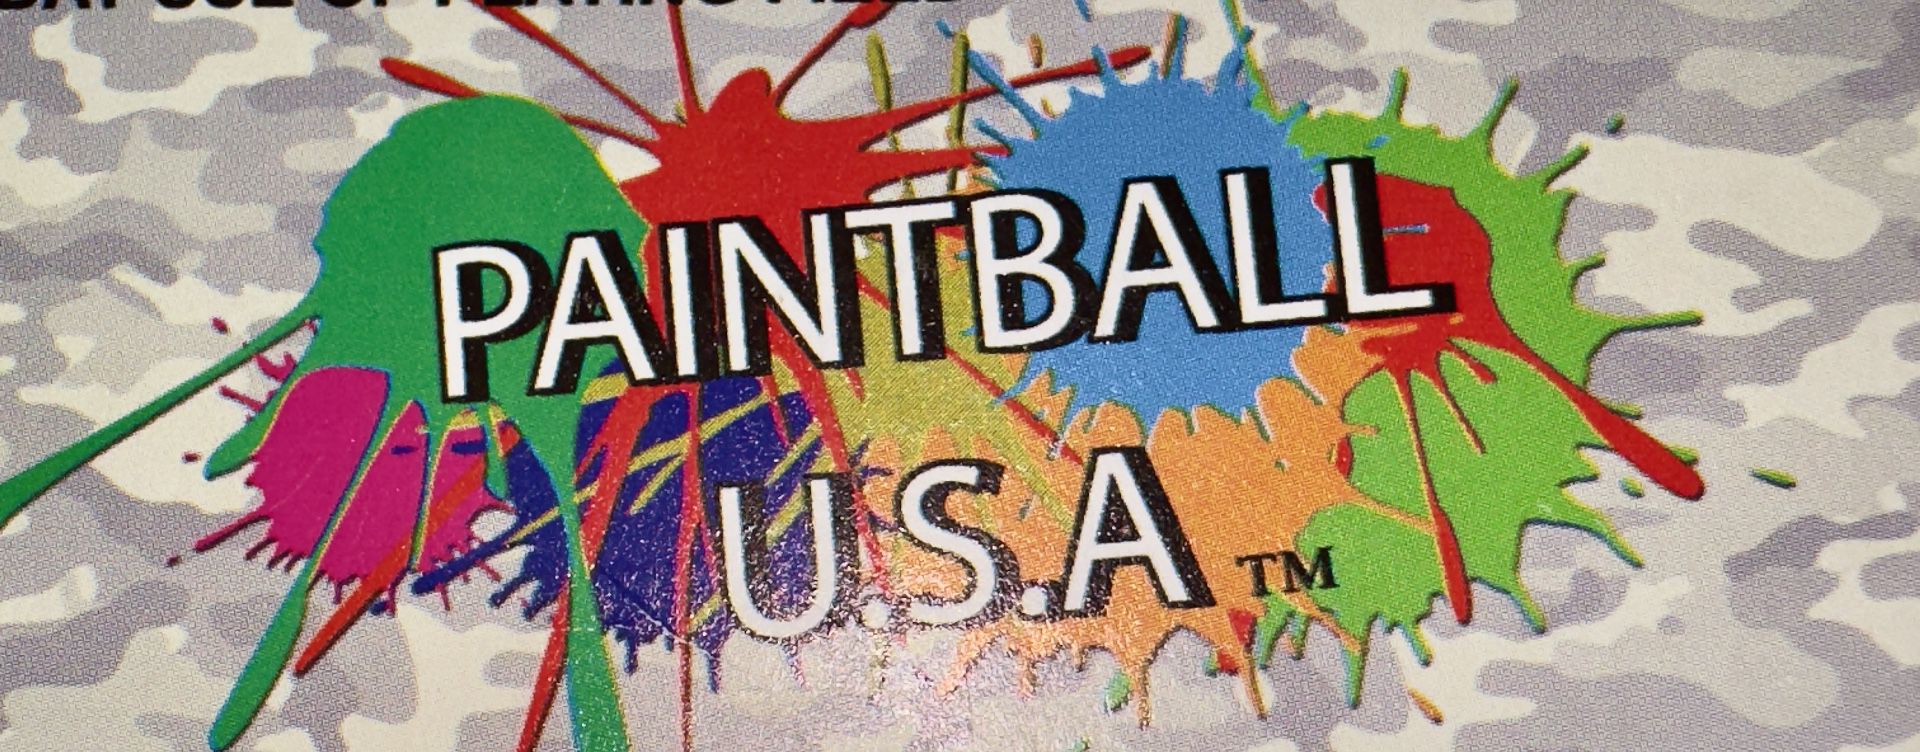 Paintball Usa 6 All Day Passes Valid At Multiple Locations All Over The Country, Every State